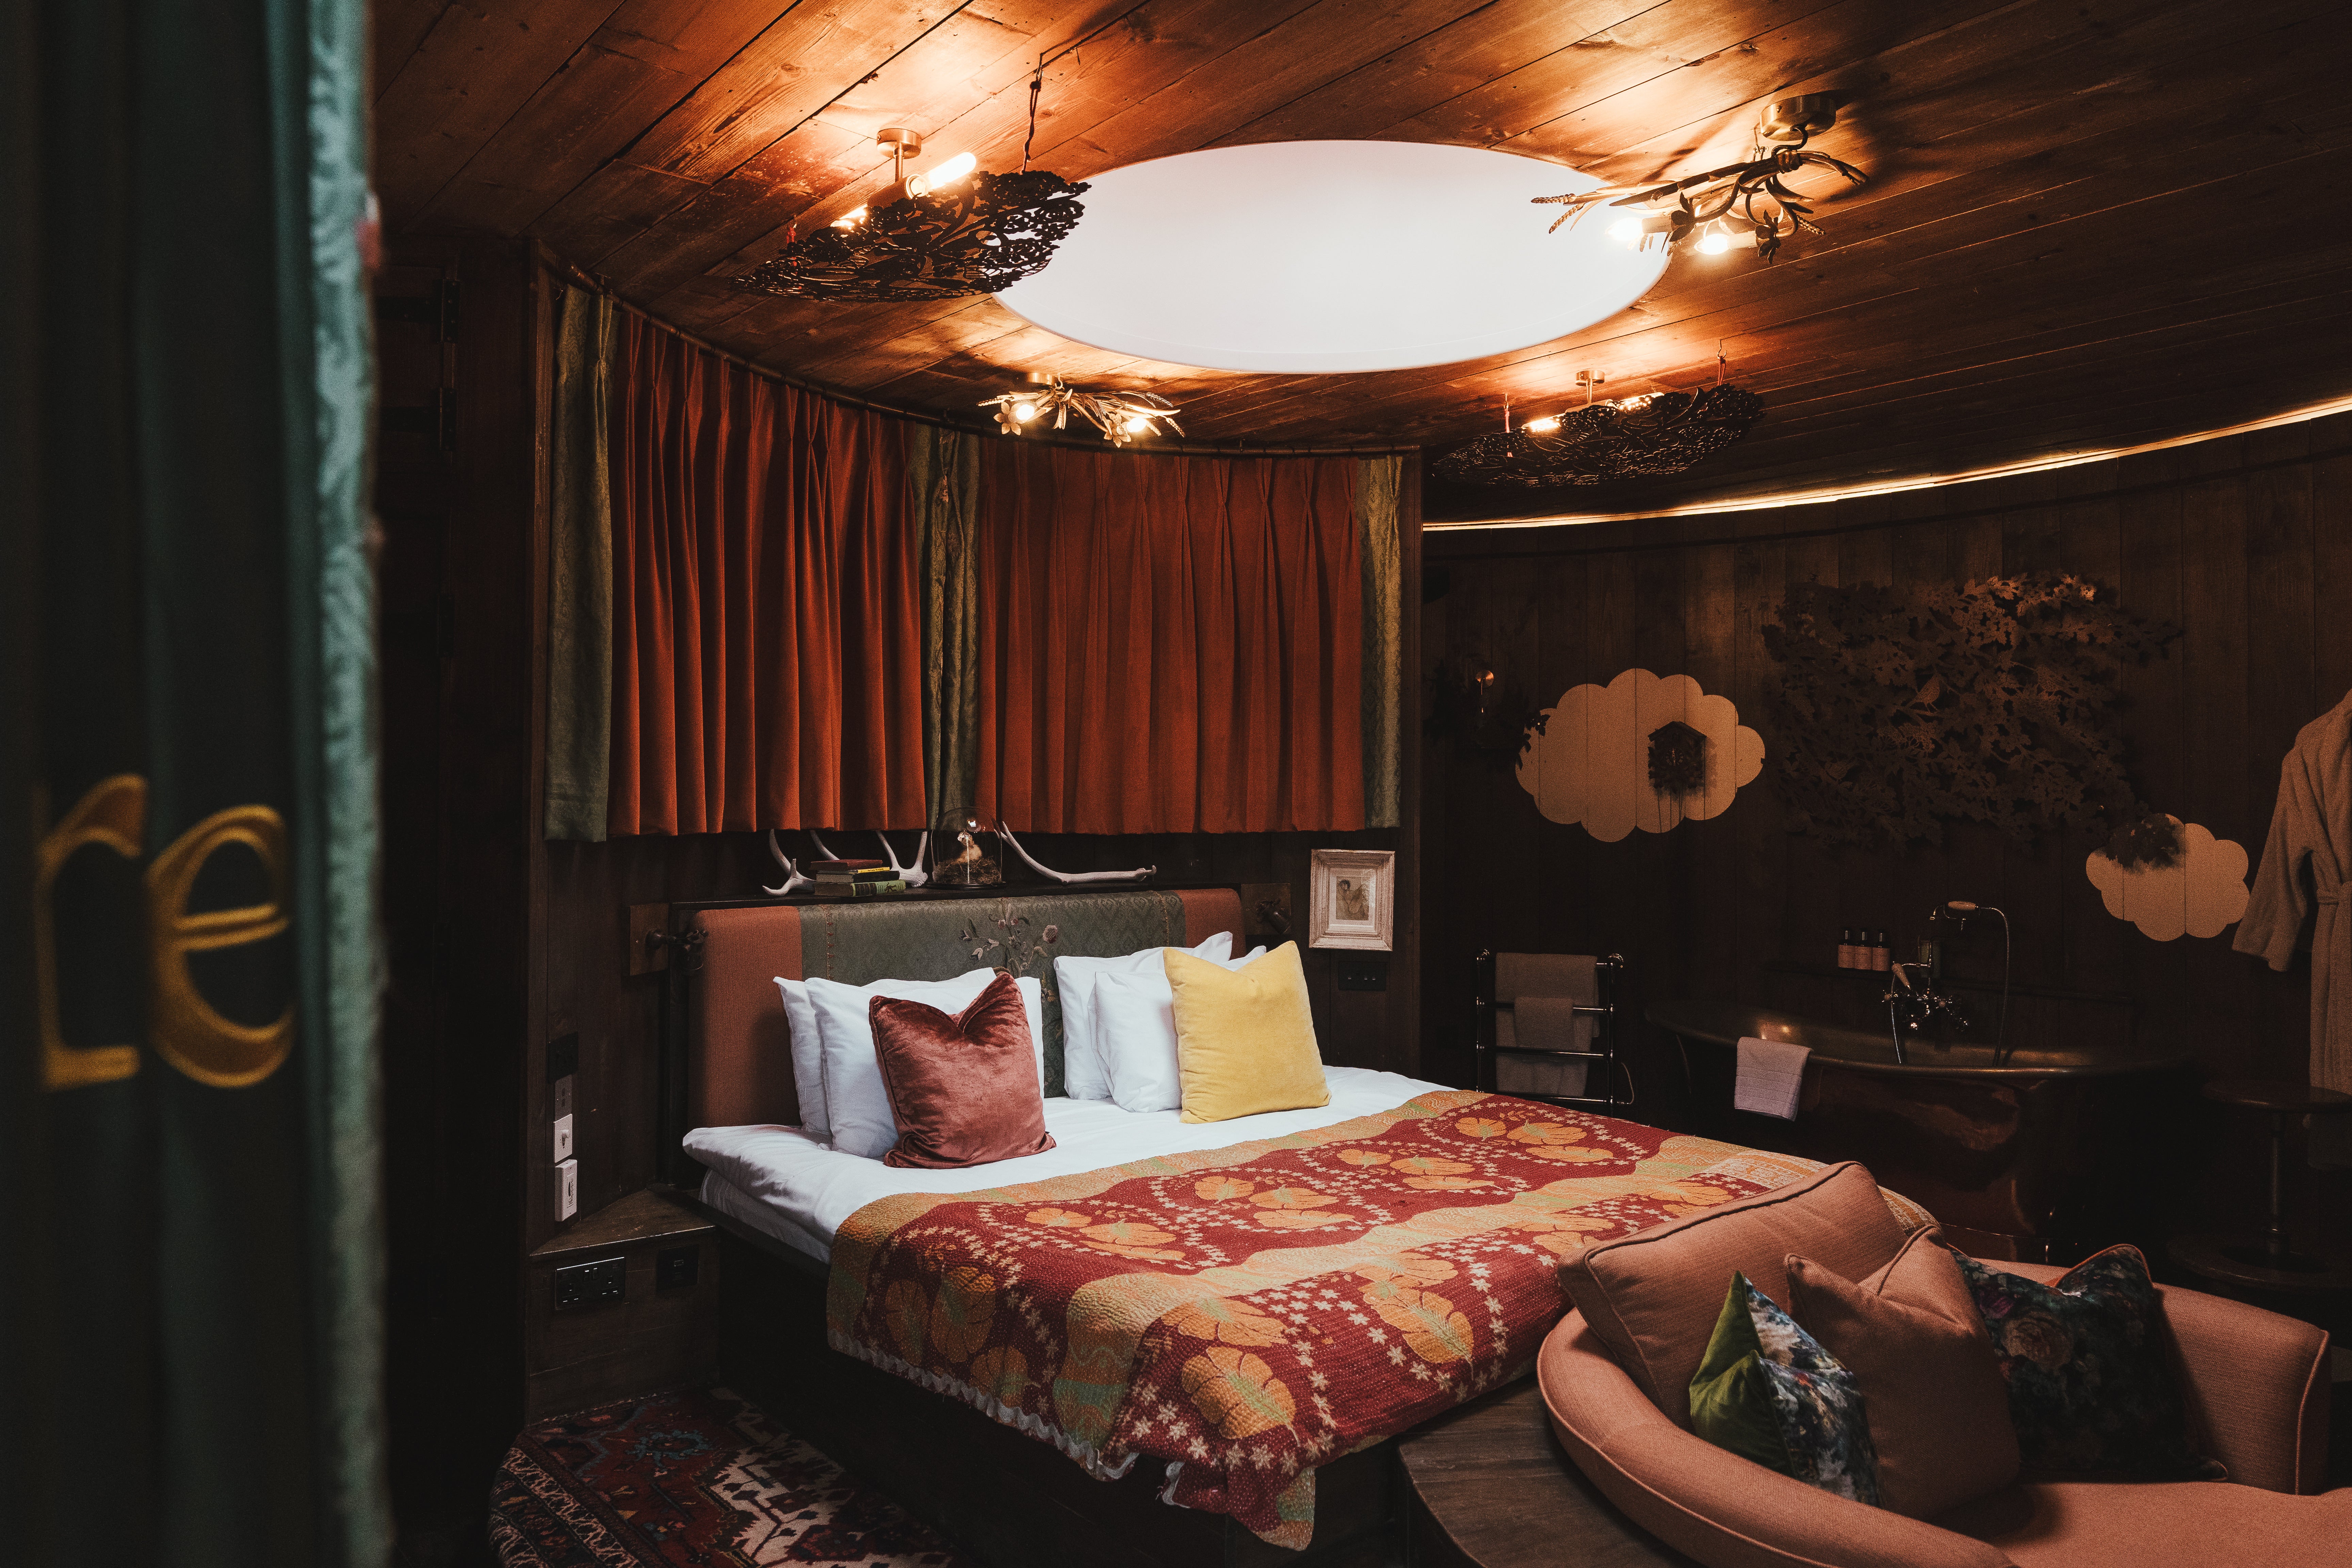 The aptly named Love Nest is one of the Bell’s most romantic rooms